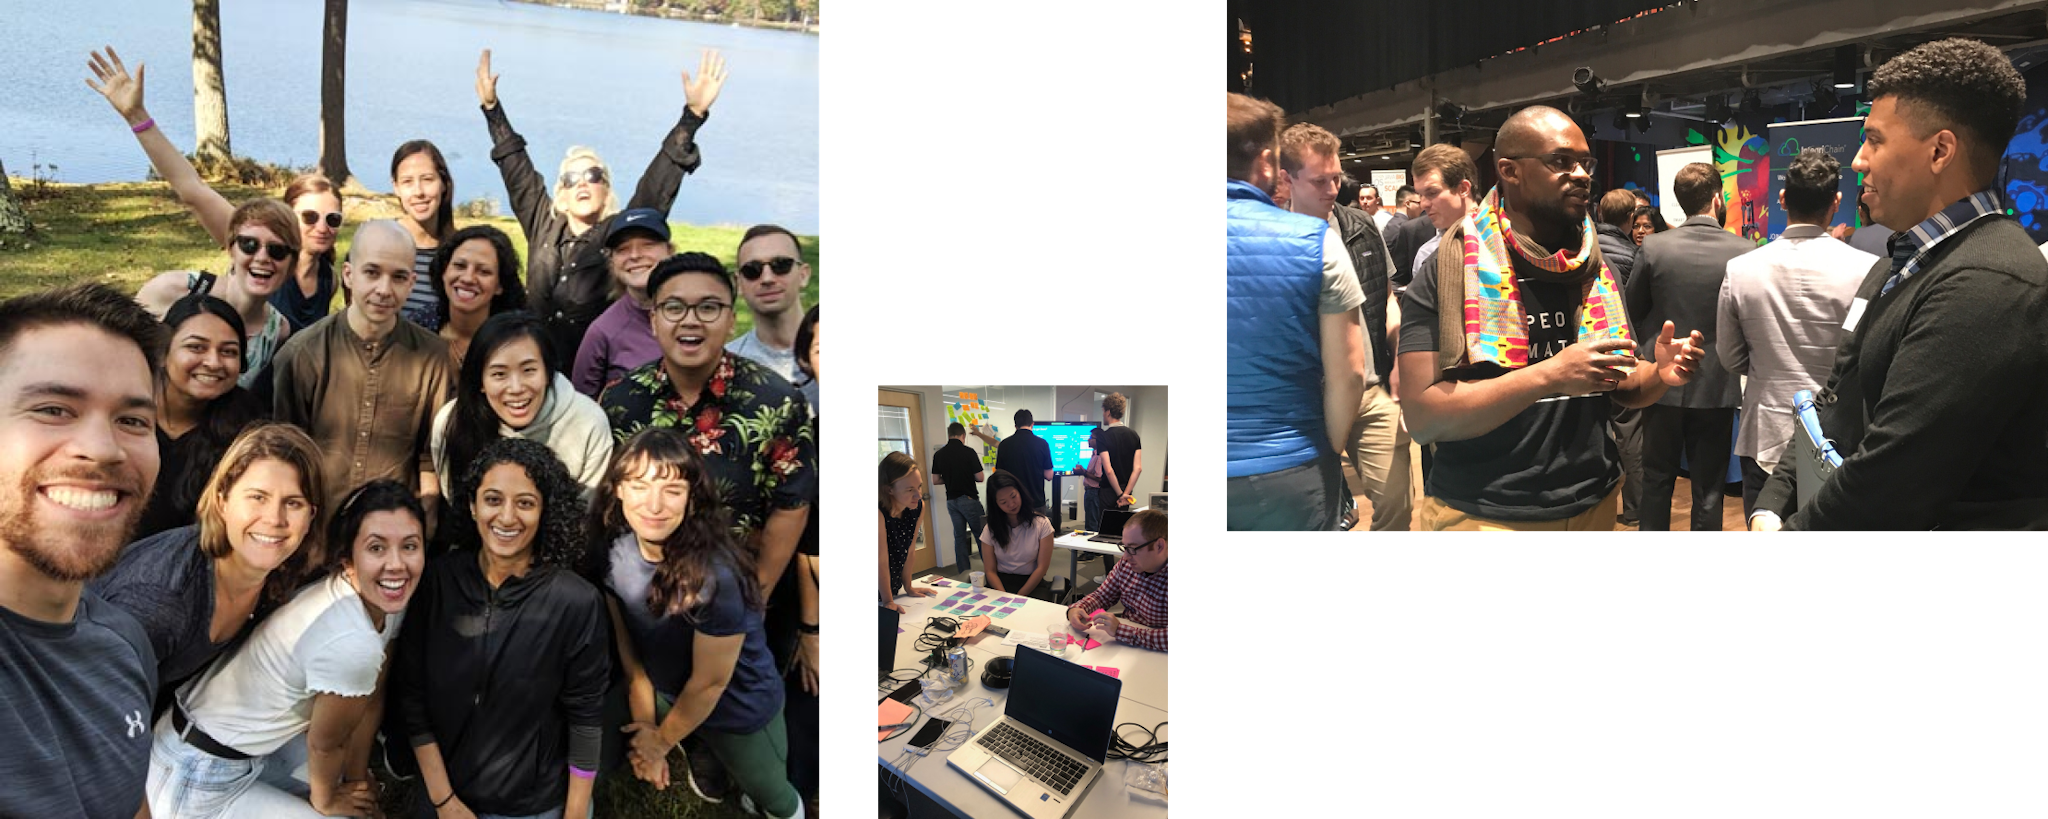 A collage of photos shows diverse Nava employees gathering at an outdoor picnic, working around a conference table, and attending a conference.